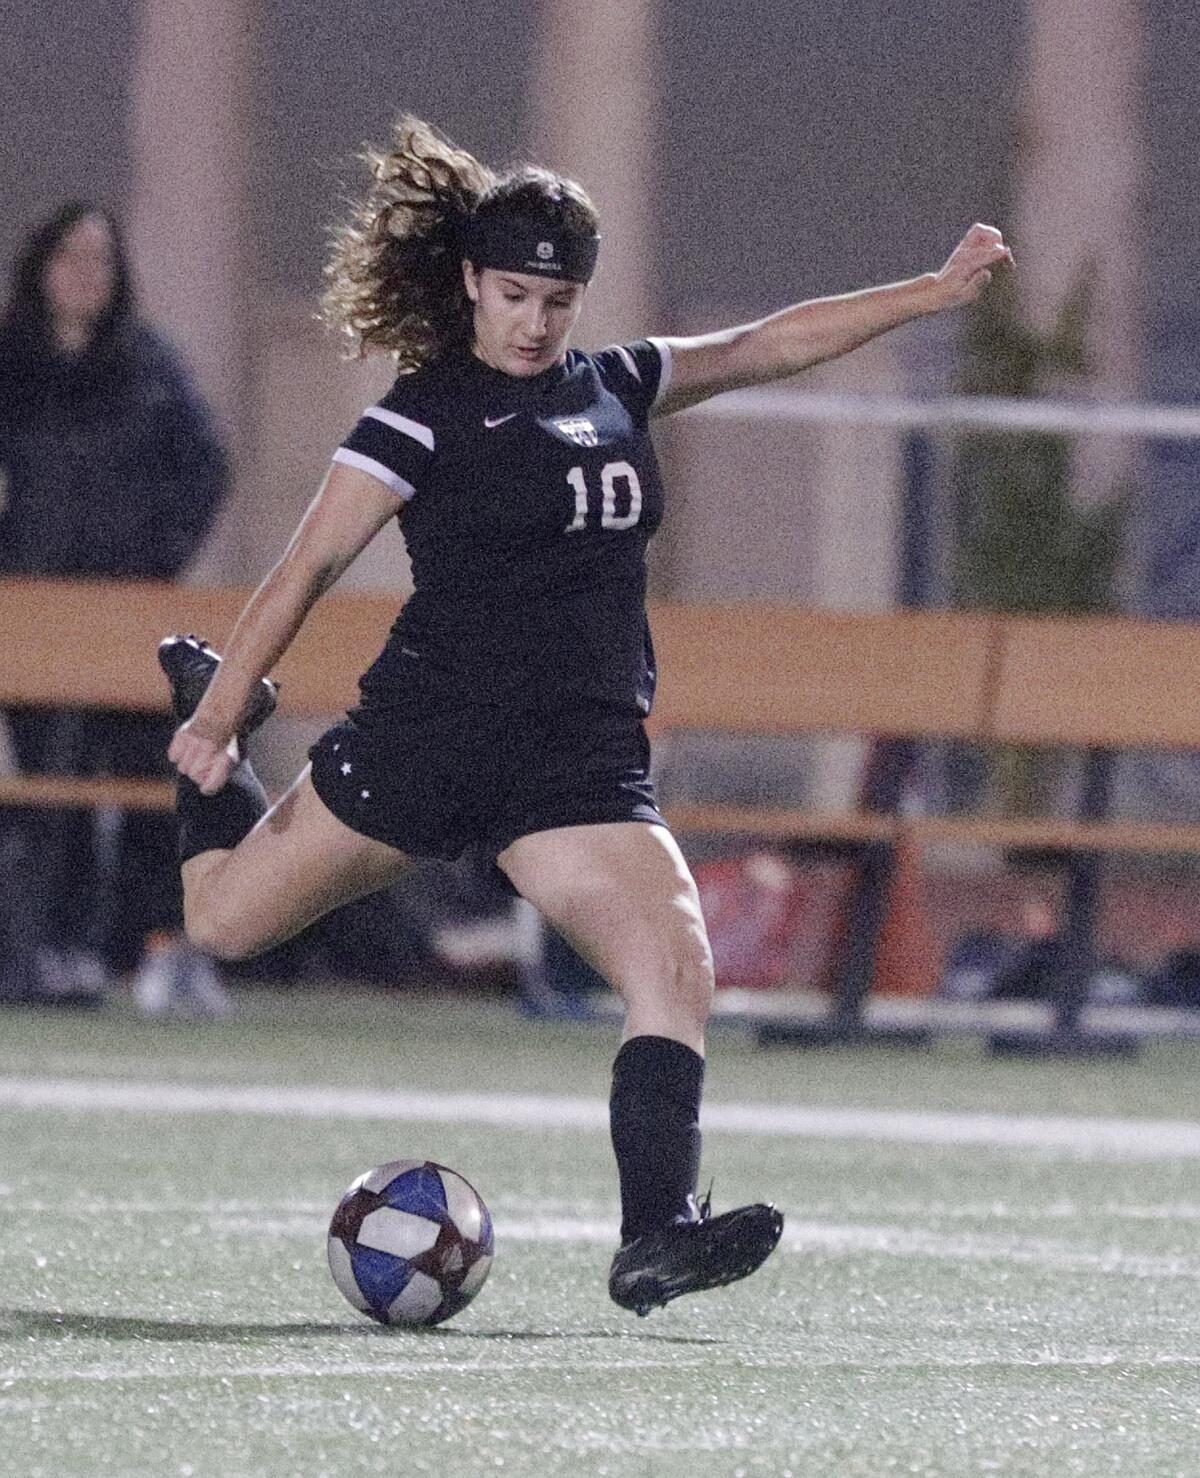 Flintridge Sacred Heart's Helena Locateli takes a thirty-five yard shot that skips and nearly scores against Sherman Oaks Notre Dame in the first half in a Mission League girls' soccer game at Occidental College in Los Angeles on Wednesday, January 8, 2020.